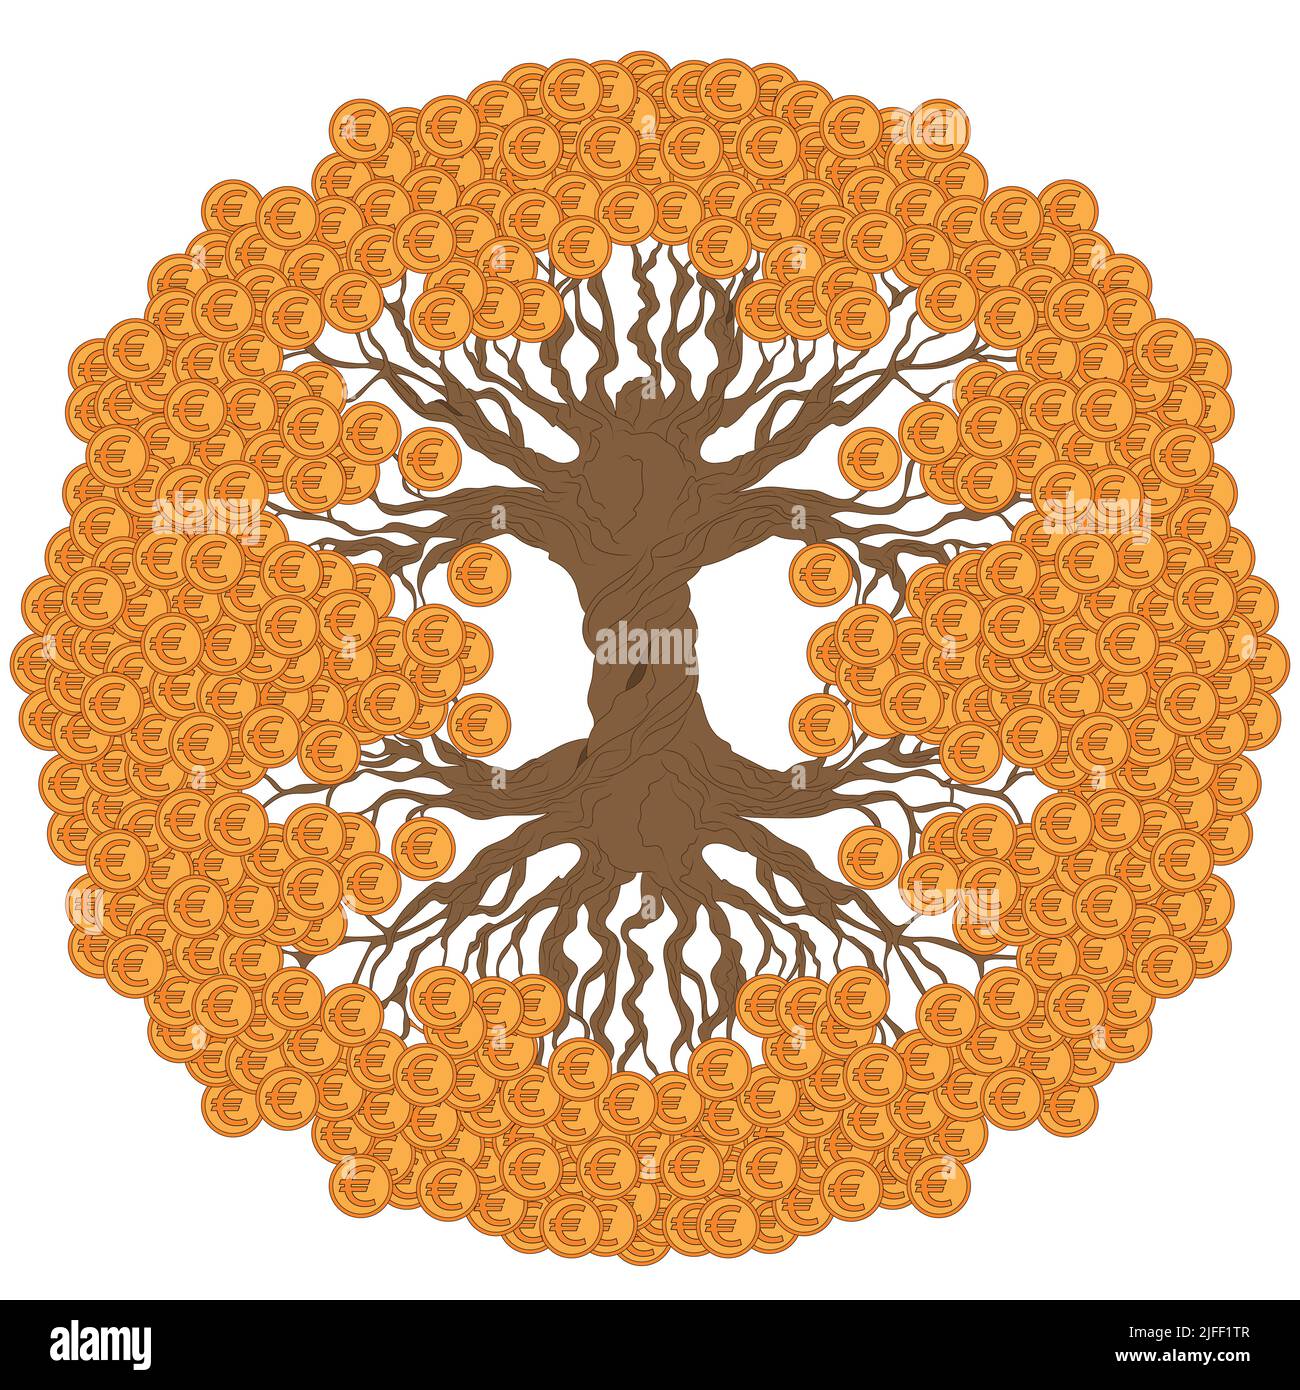 Money tree with EURO coins. A traditional feng shui symbol for attracting wealth and prosperity. Color illustration. Stock Vector